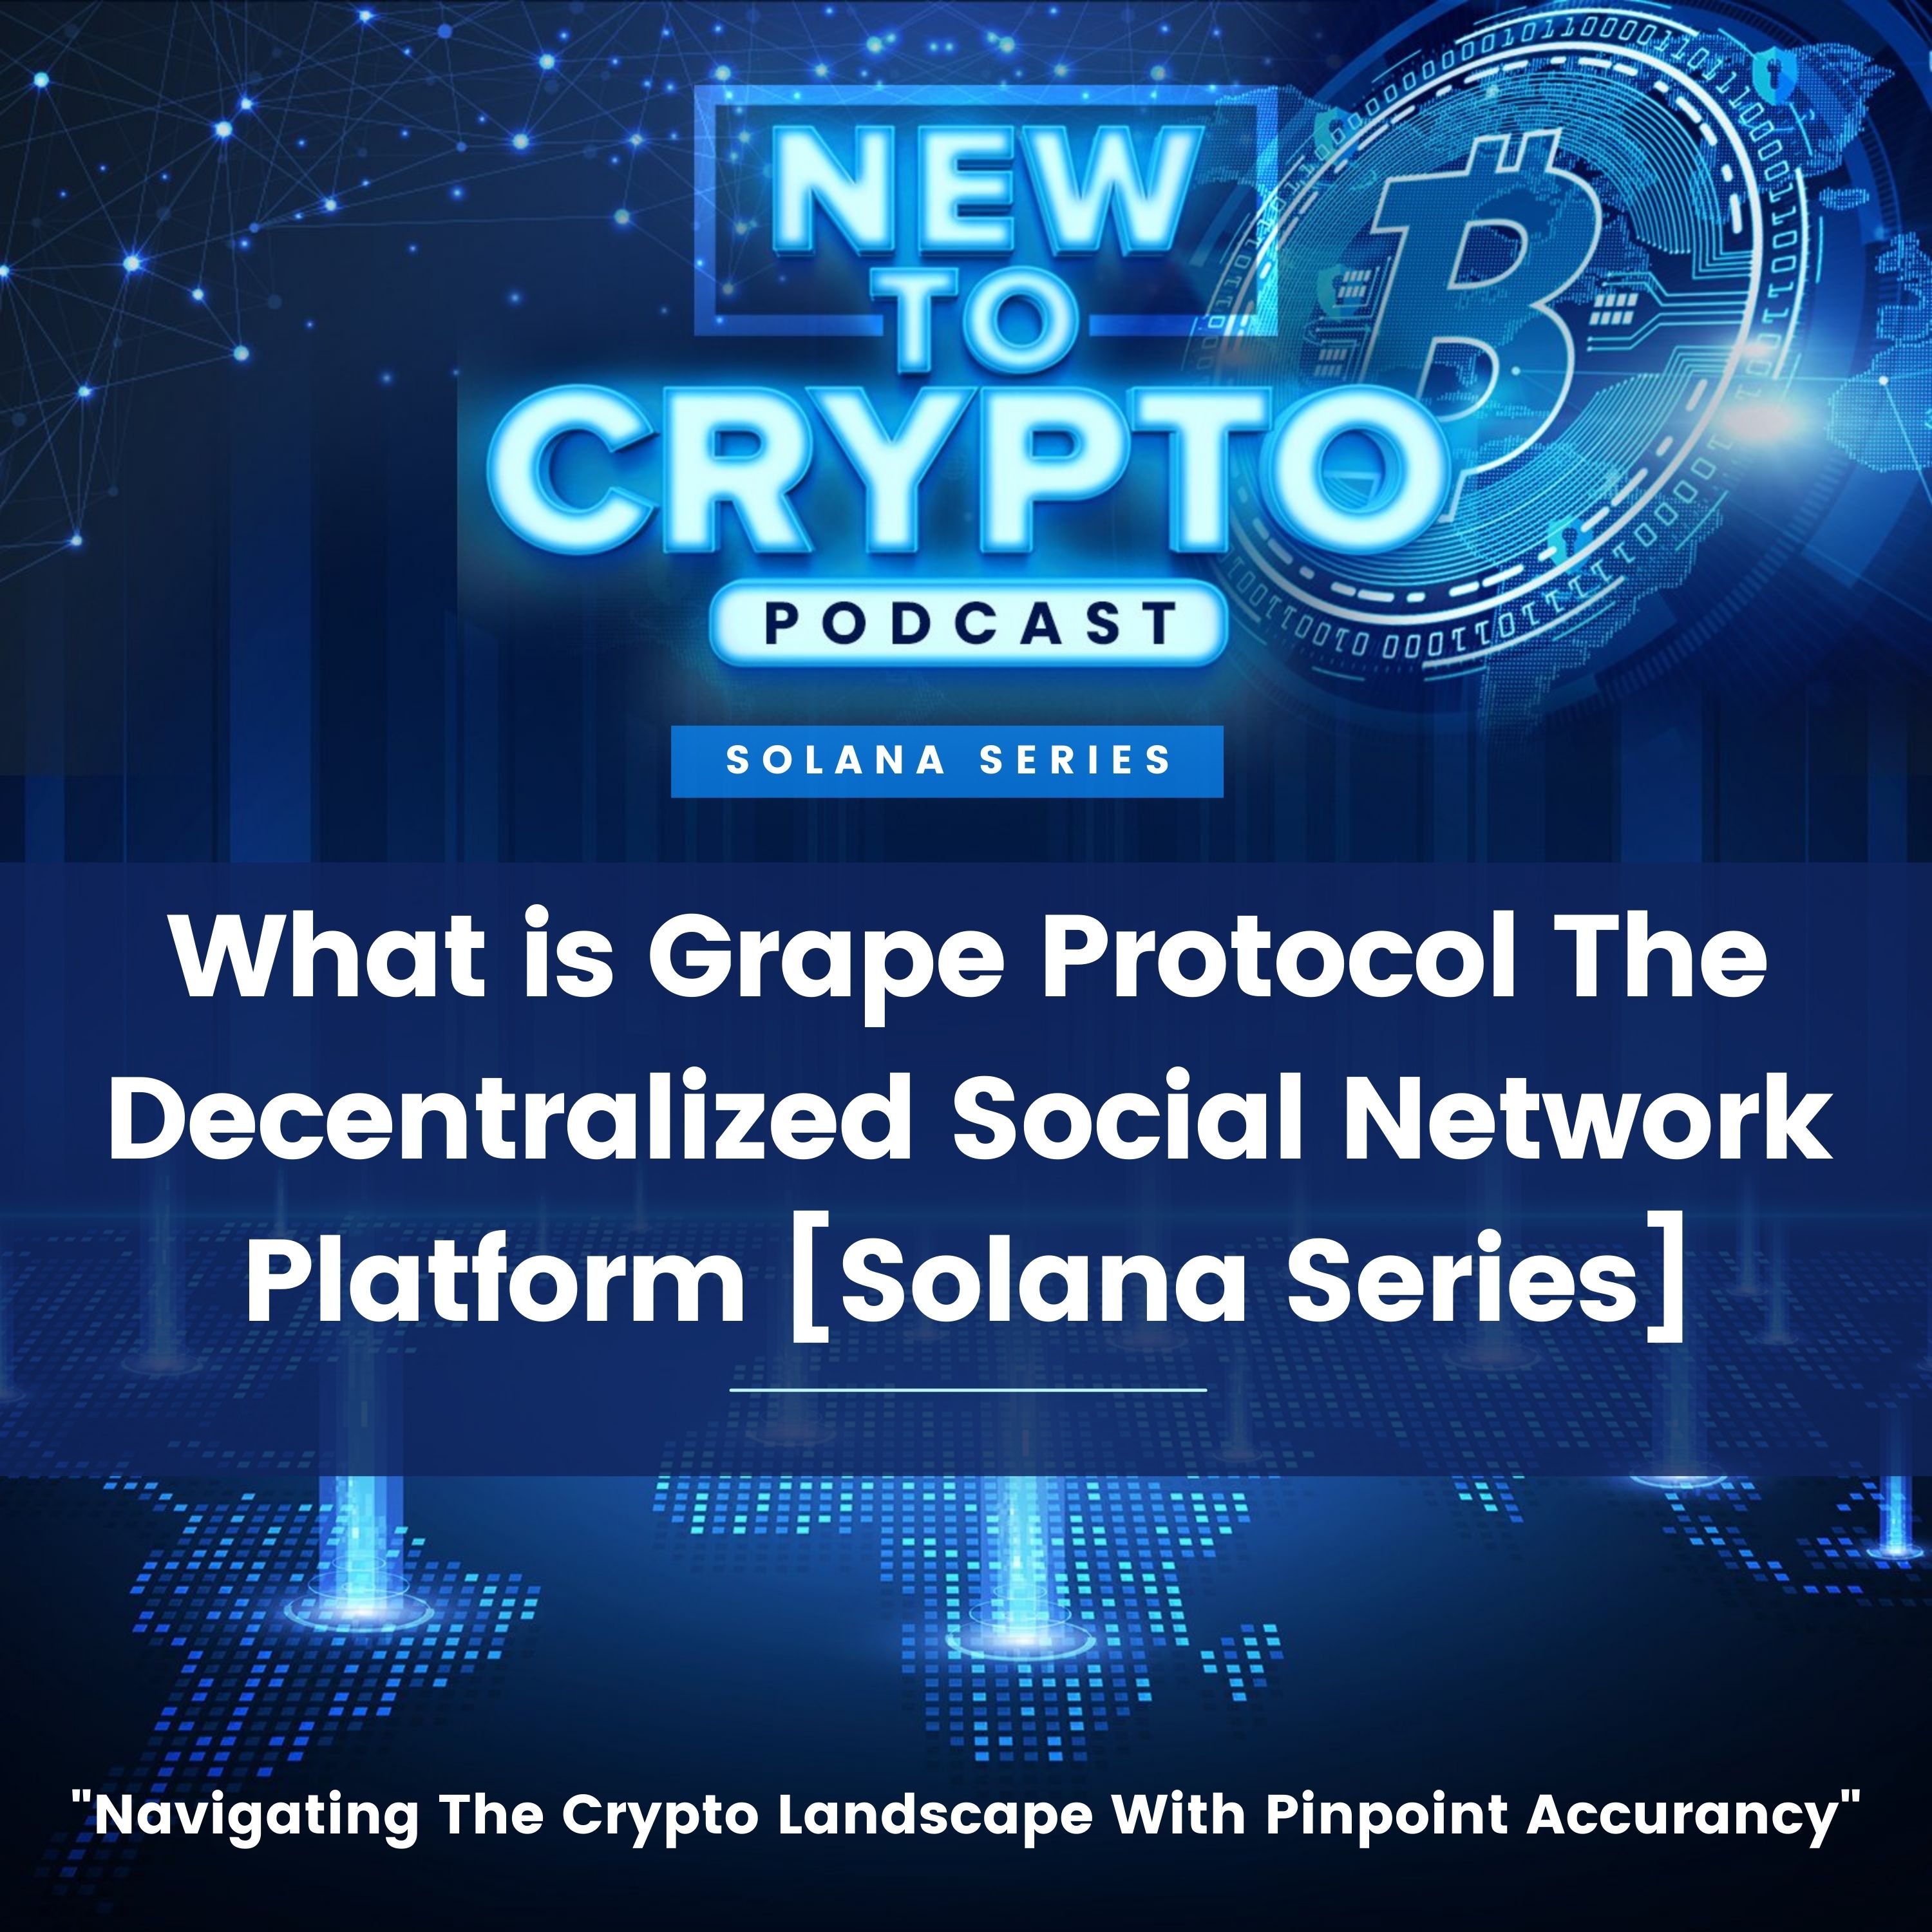 What is Grape Protocol The Decentralized Social Network Platform [Solana Series]